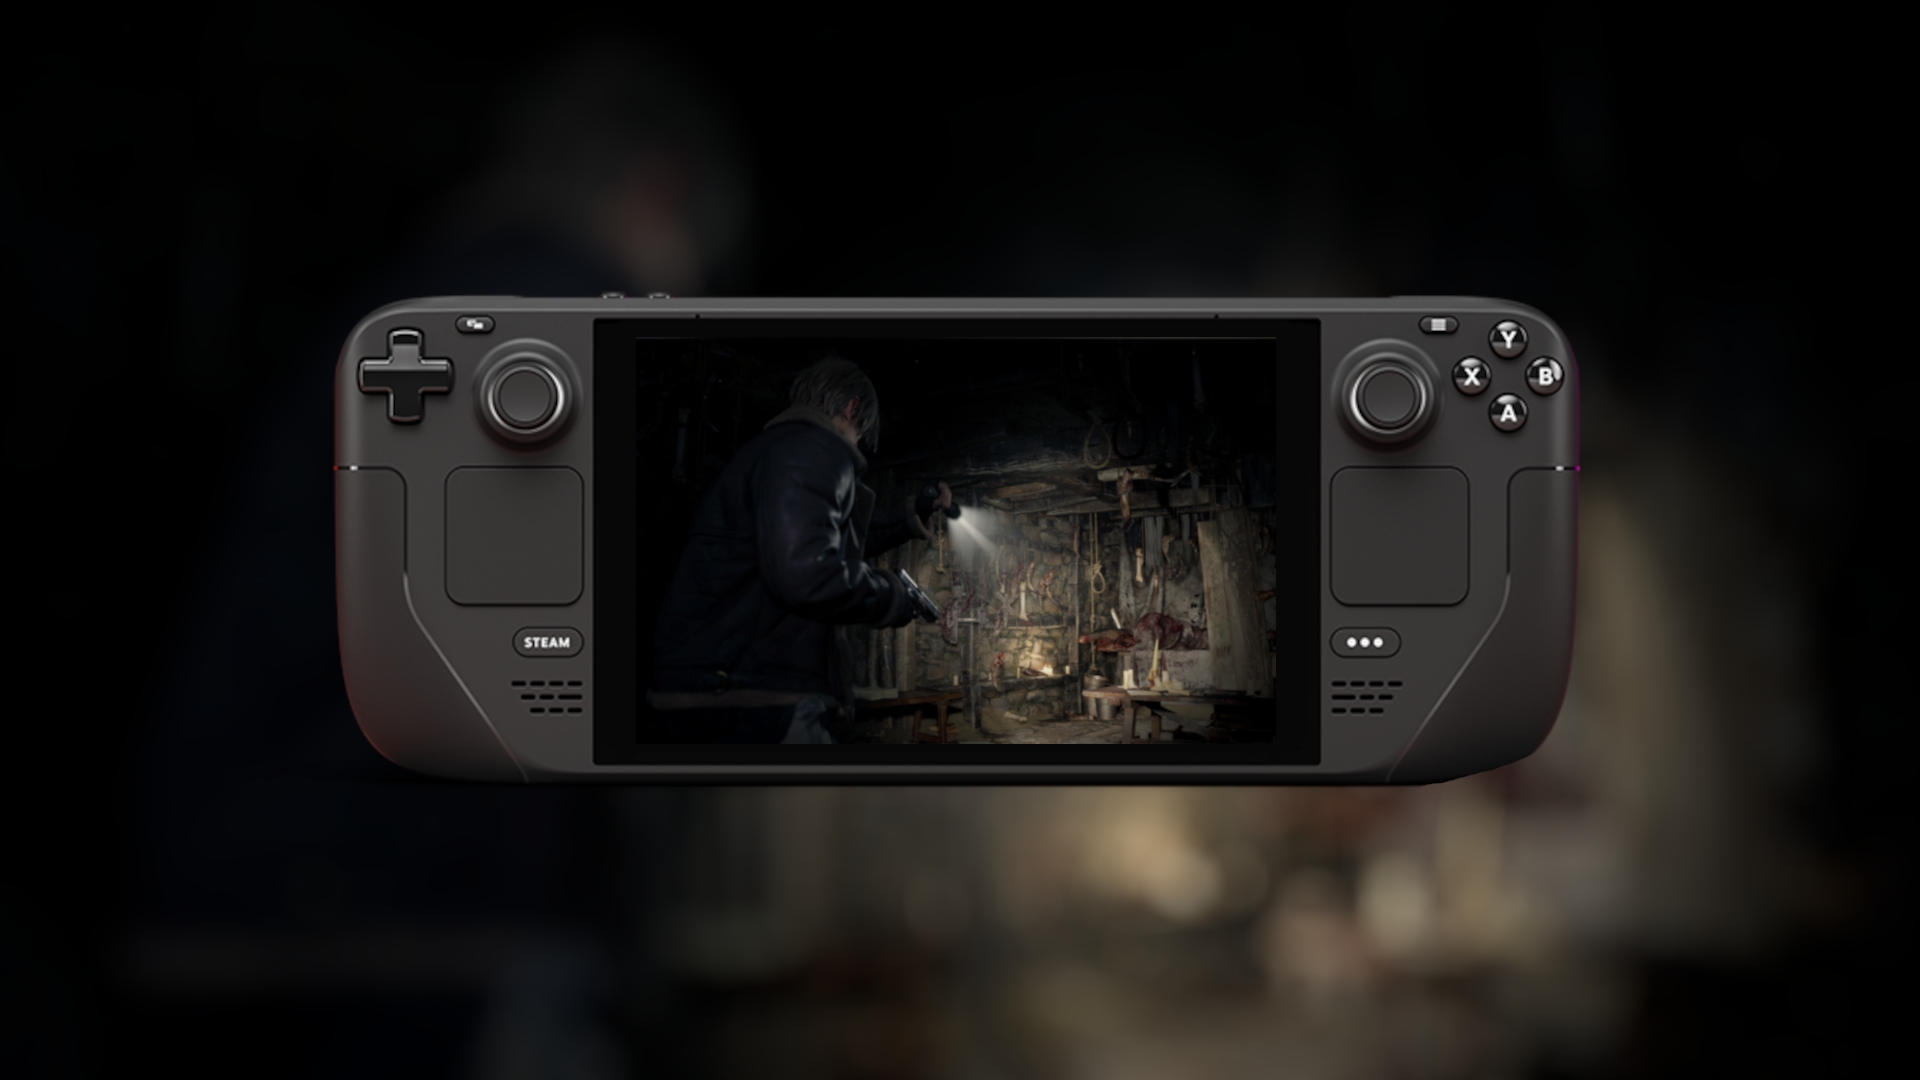 Can you play Resident Evil 4 Remake on Steam Deck?